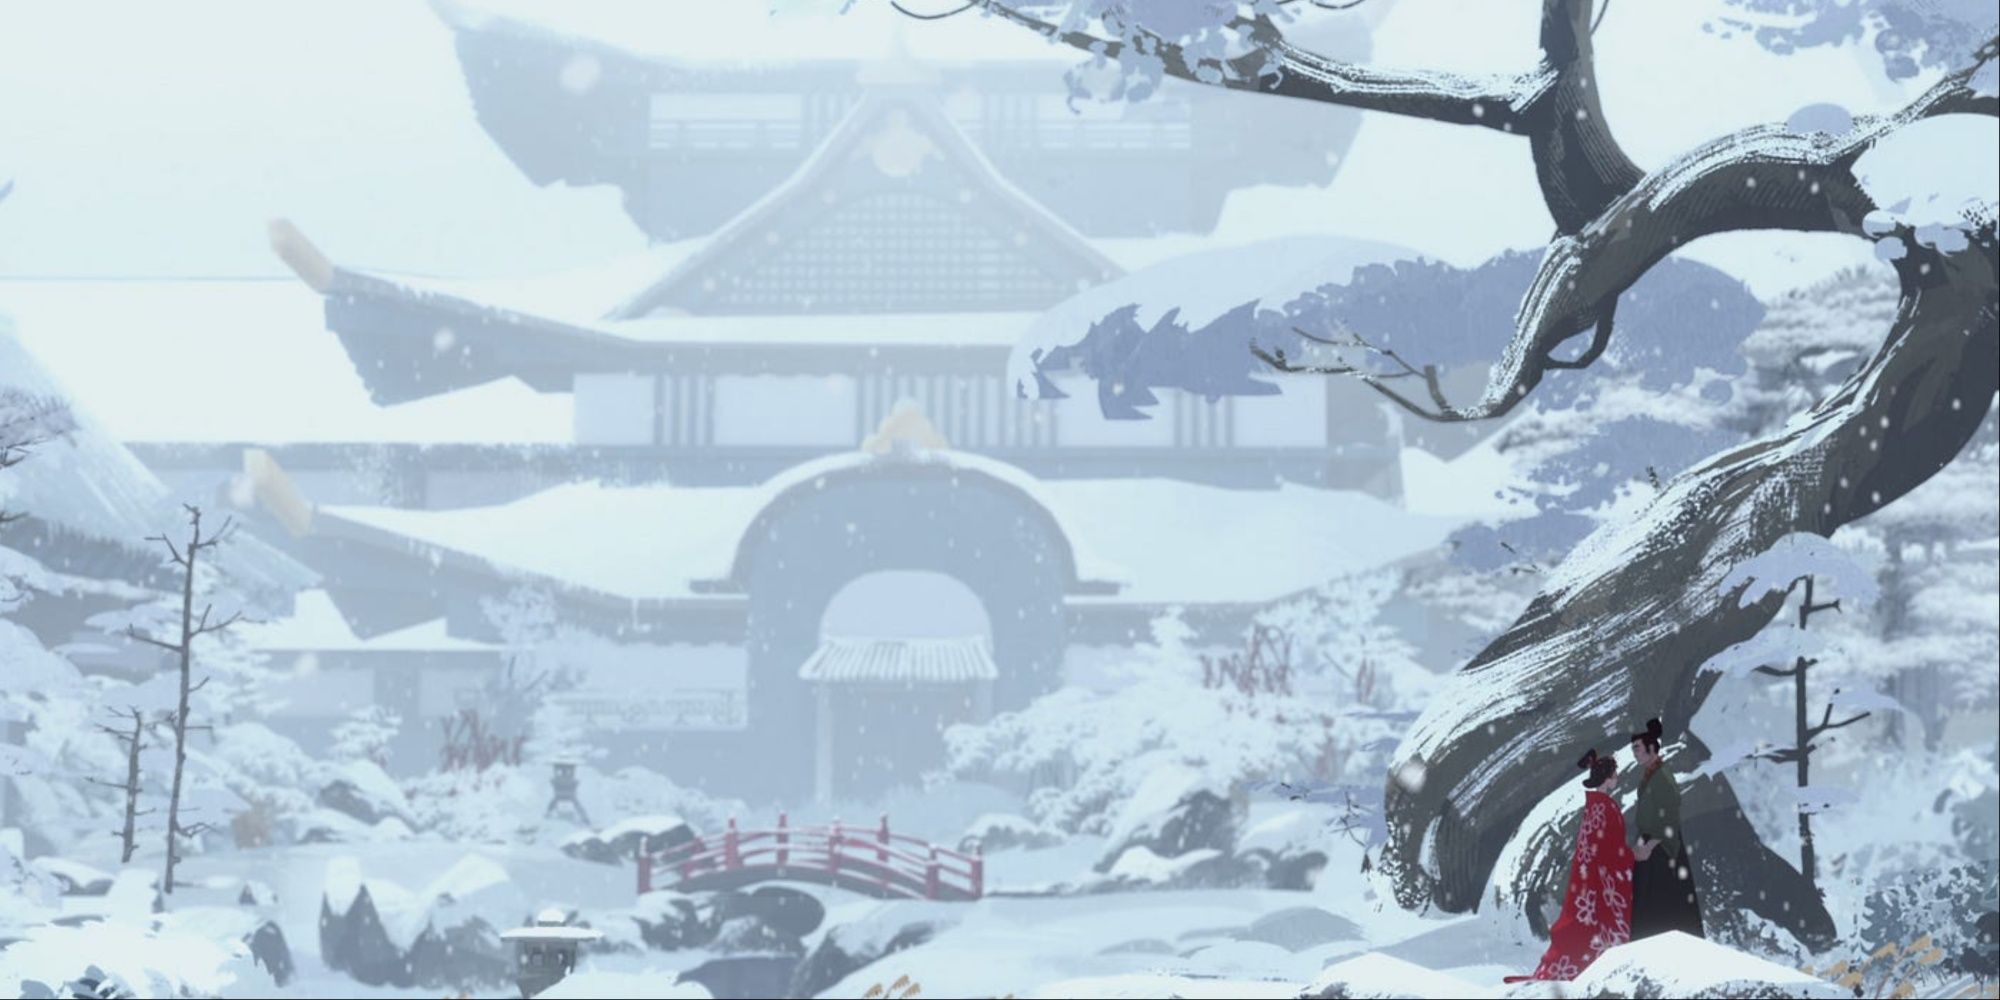 blue eye samurai taigan and akemi in the snowy landscape with a big tree and palace in the background